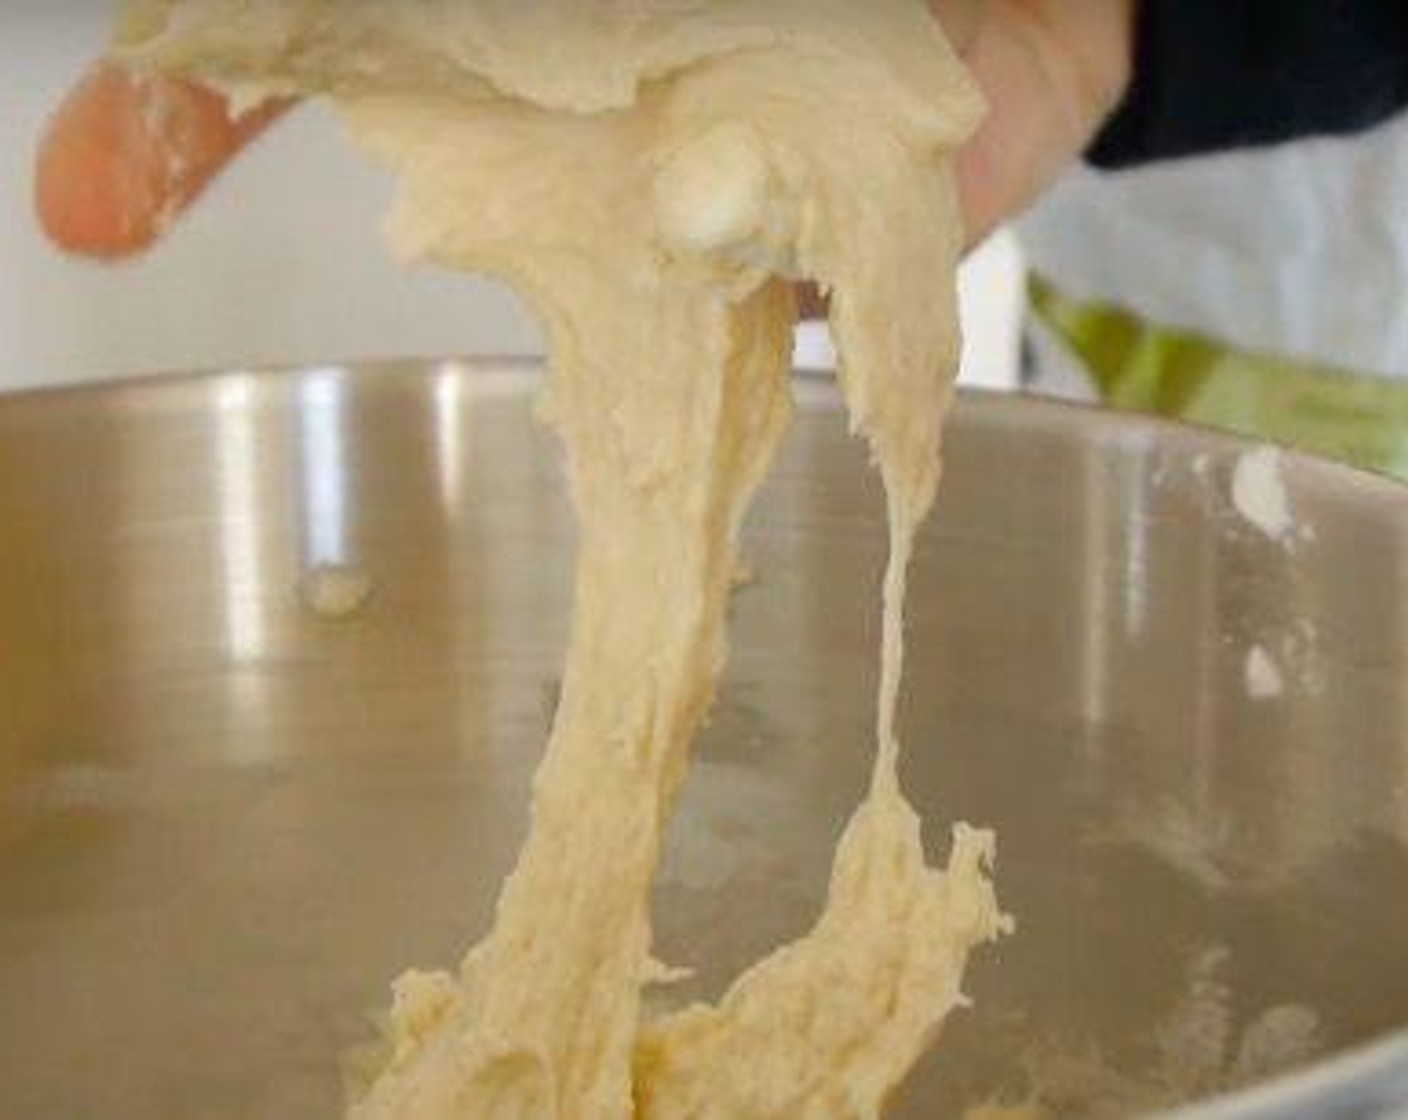 step 1 In a mixer or bowl add the All-Purpose Flour (4 cups), Free Range Egg (2), Butter (2 1/2 Tbsp), Granulated Sugar (1/2 tsp), Instant Dry Yeast (1 Tbsp), Salt (1 tsp) and Milk (1 1/4 cups) and mix together kneading until the dough has reached the required consistency.